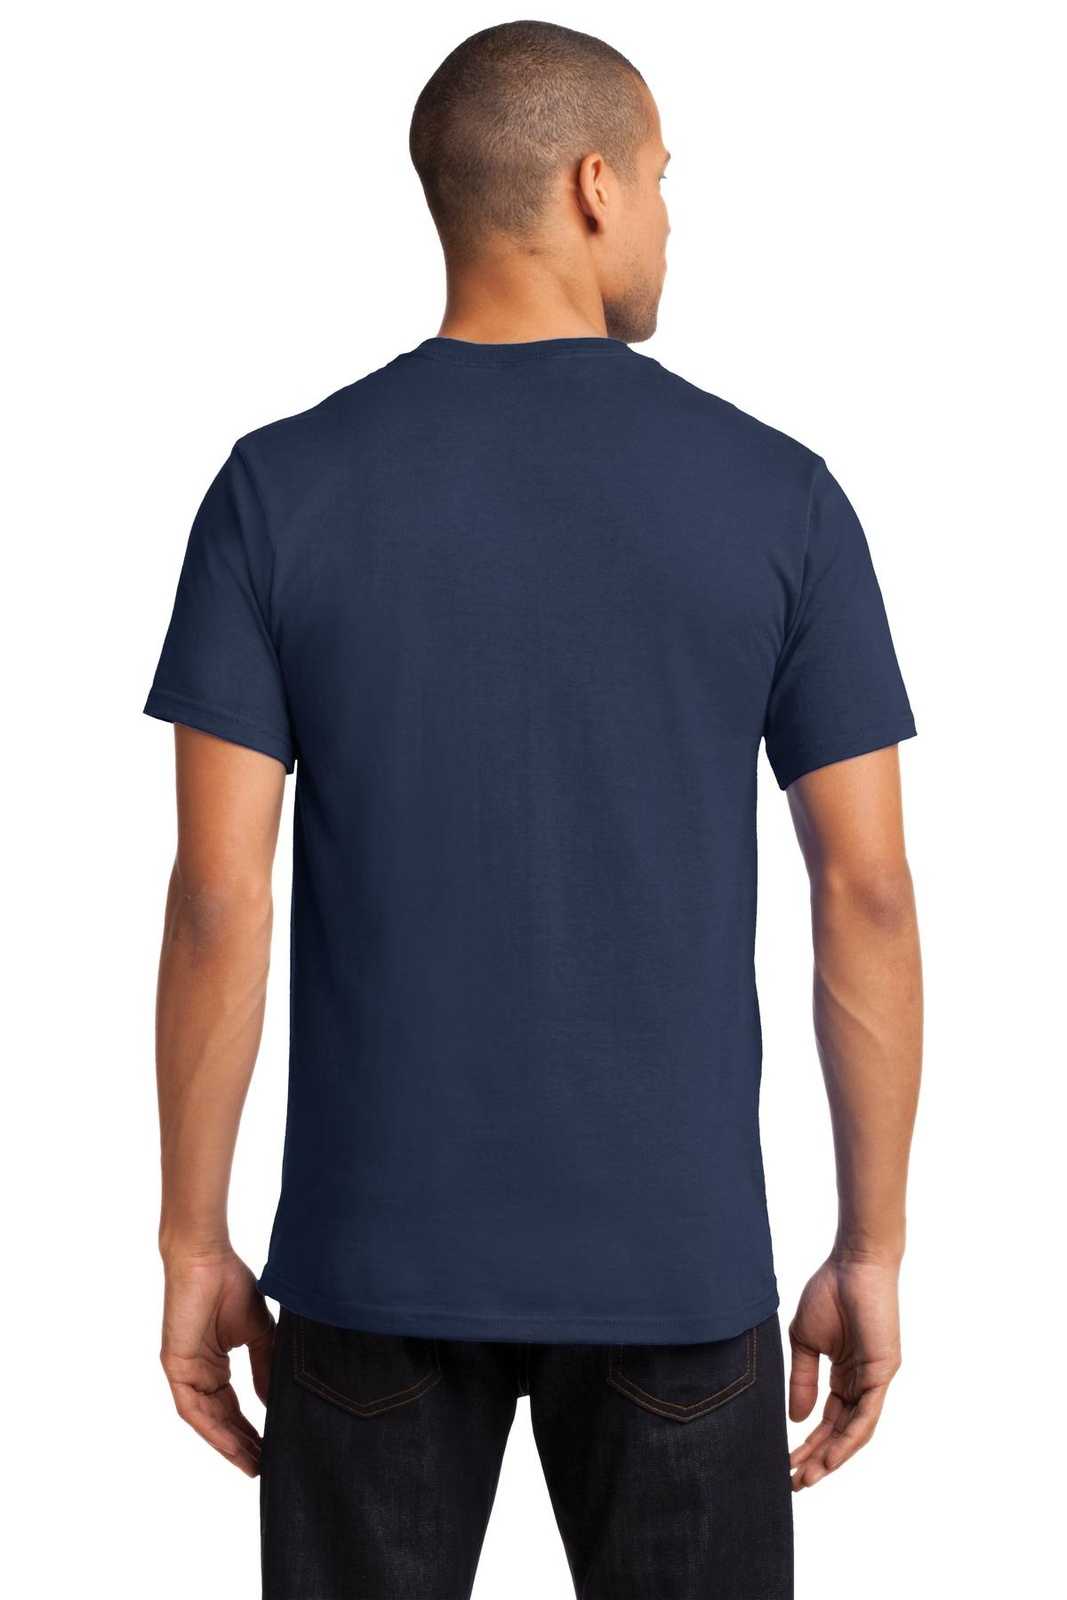 Port & Company PC61P Essential Pocket Tee - Navy - HIT a Double - 1